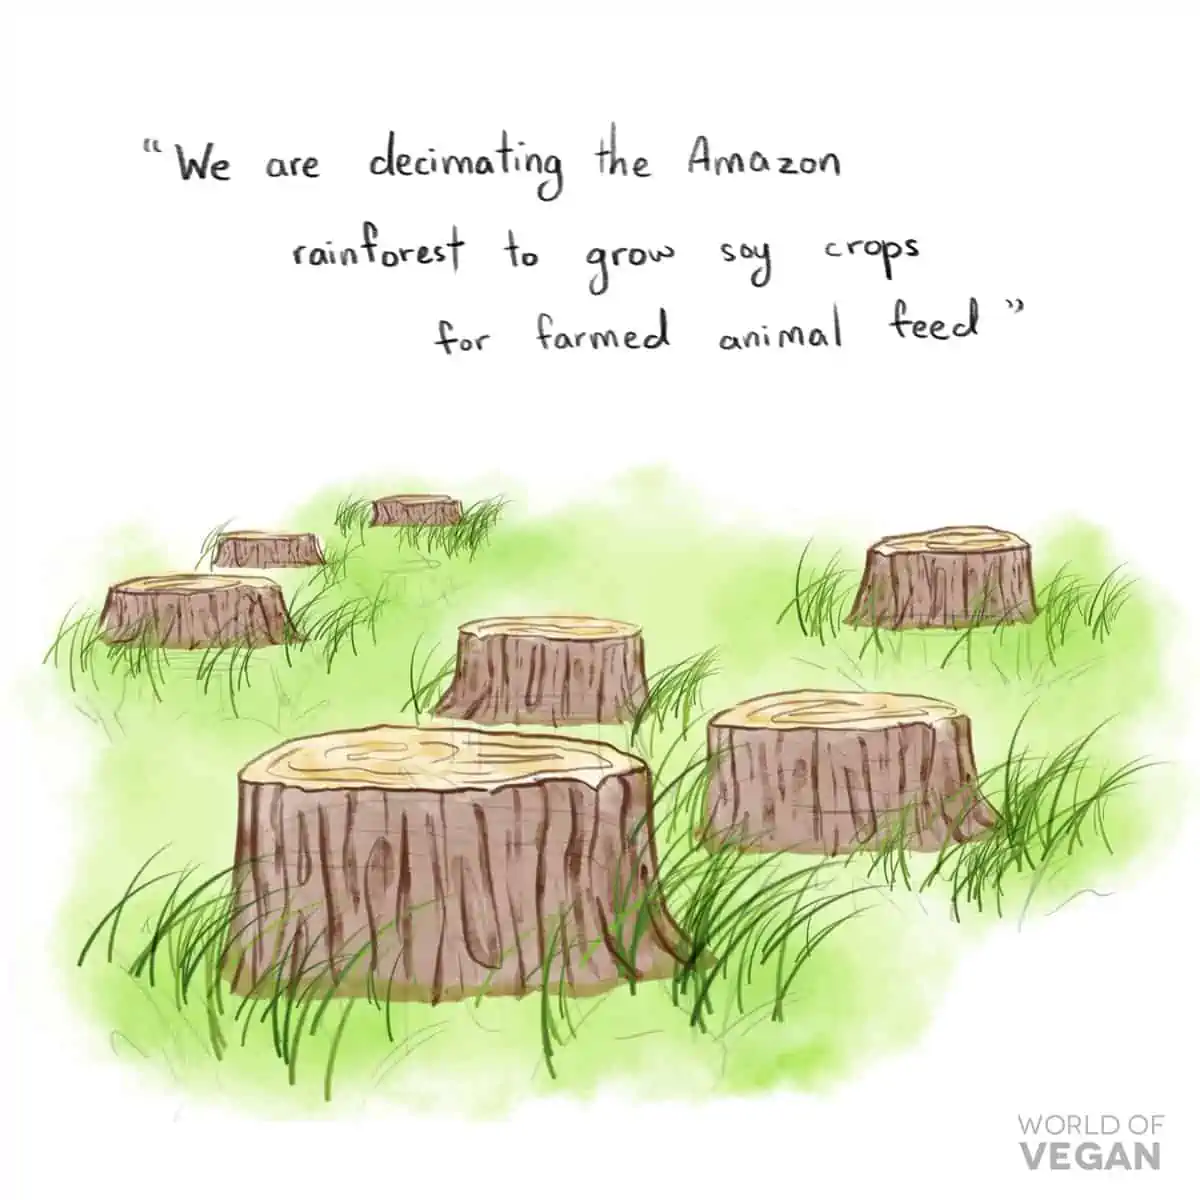 Art illustration of deforestation showing tree stumps caused by animal agriculture and the dairy industry.